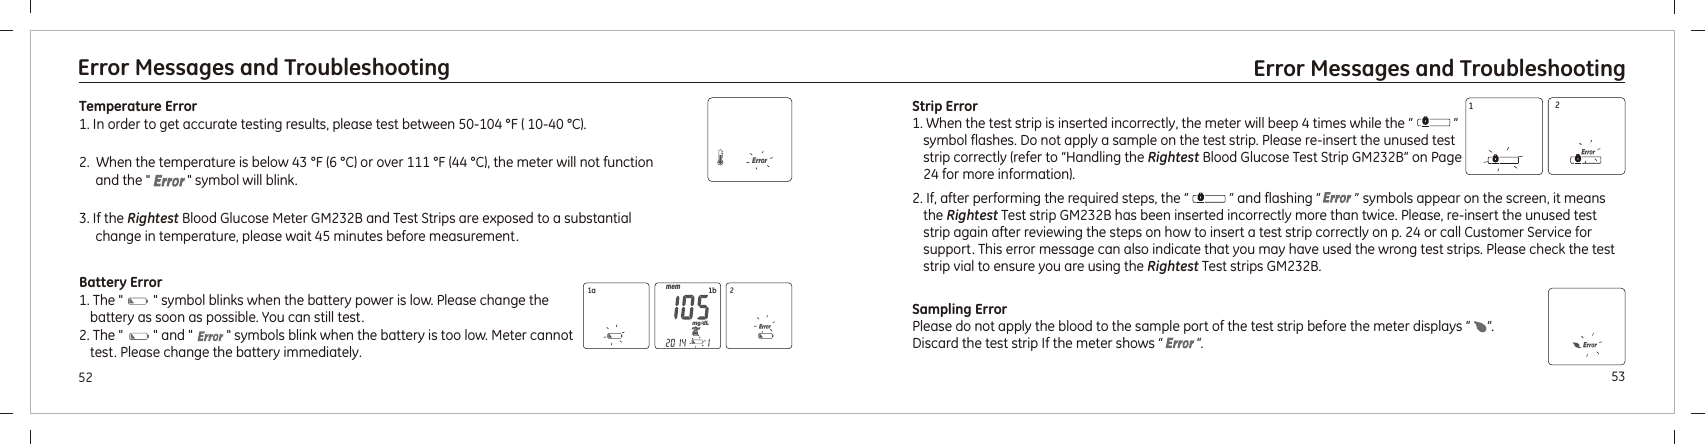 2. If, after performing the required steps, the “            ” and flashing “          ” symbols appear on the screen, it means the Rightest Test strip  has been inserted incorrectly more than twice. Please, re-insert the unused test strip again after reviewing the steps on how to insert a test strip correctly on p. 24 or call Customer Service for support. This error message can also indicate that you may have used the wrong test strips. Please check the test strip vial to ensure you are using the Rightest Test strips  .GM232B GM232B5352Error Messages and Troubleshooting Error Messages and TroubleshootingTemperature Error1. In order to get accurate testing results, please test between 50-104 °F ( 10-40 °C).    2.  When the temperature is below 43 °F (6 °C) or over 111 °F (44 °C), the meter will not function and the &quot;           &quot; symbol will blink.3. If the Rightest Blood Glucose Meter  and Test Strips are exposed to a substantial change in temperature, please wait 45 minutes before measurement.GM232B Battery Error1. The &quot;         &quot; symbol blinks when the battery power is low. Please change the battery as soon as possible. You can still test.and &quot;            symbols blink when the battery is too low. Meter cannot test. Please change the battery immediately.2. The &quot;         &quot;  &quot;Strip Error1. When the test strip is inserted incorrectly, the meter will beep 4 times while the “            ” symbol flashes. Do not apply a sample on the test strip. Please re-insert the unused test strip correctly (refer to “Handling the Rightest Blood Glucose Test Strip  “ on Page 24 for more information).GM232B1a 1b 212Sampling ErrorPlease do not apply the blood to the sample port of the test strip before the meter displays ”     ”. Discard the test strip If the meter shows “          “.